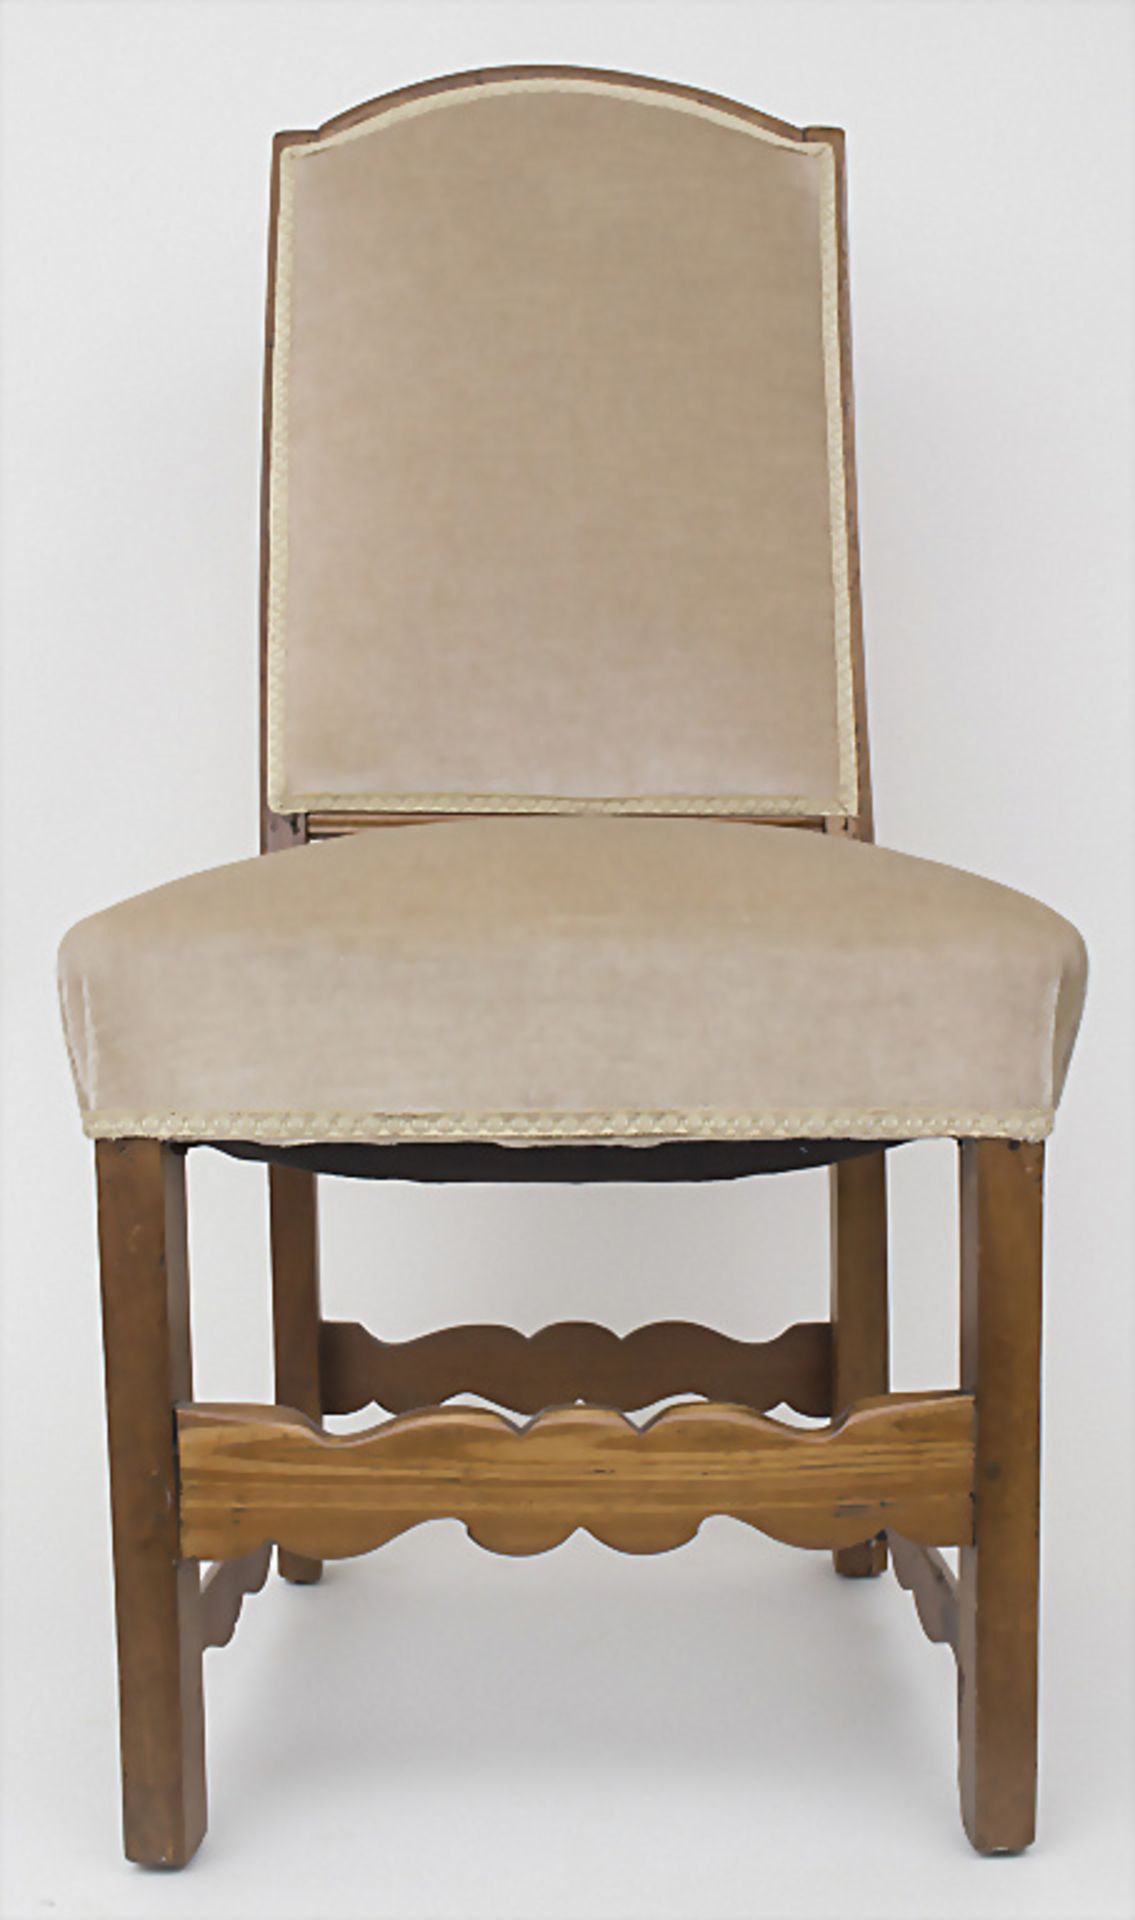 Stuhl mit Veloursbezug / A chair with velour cover